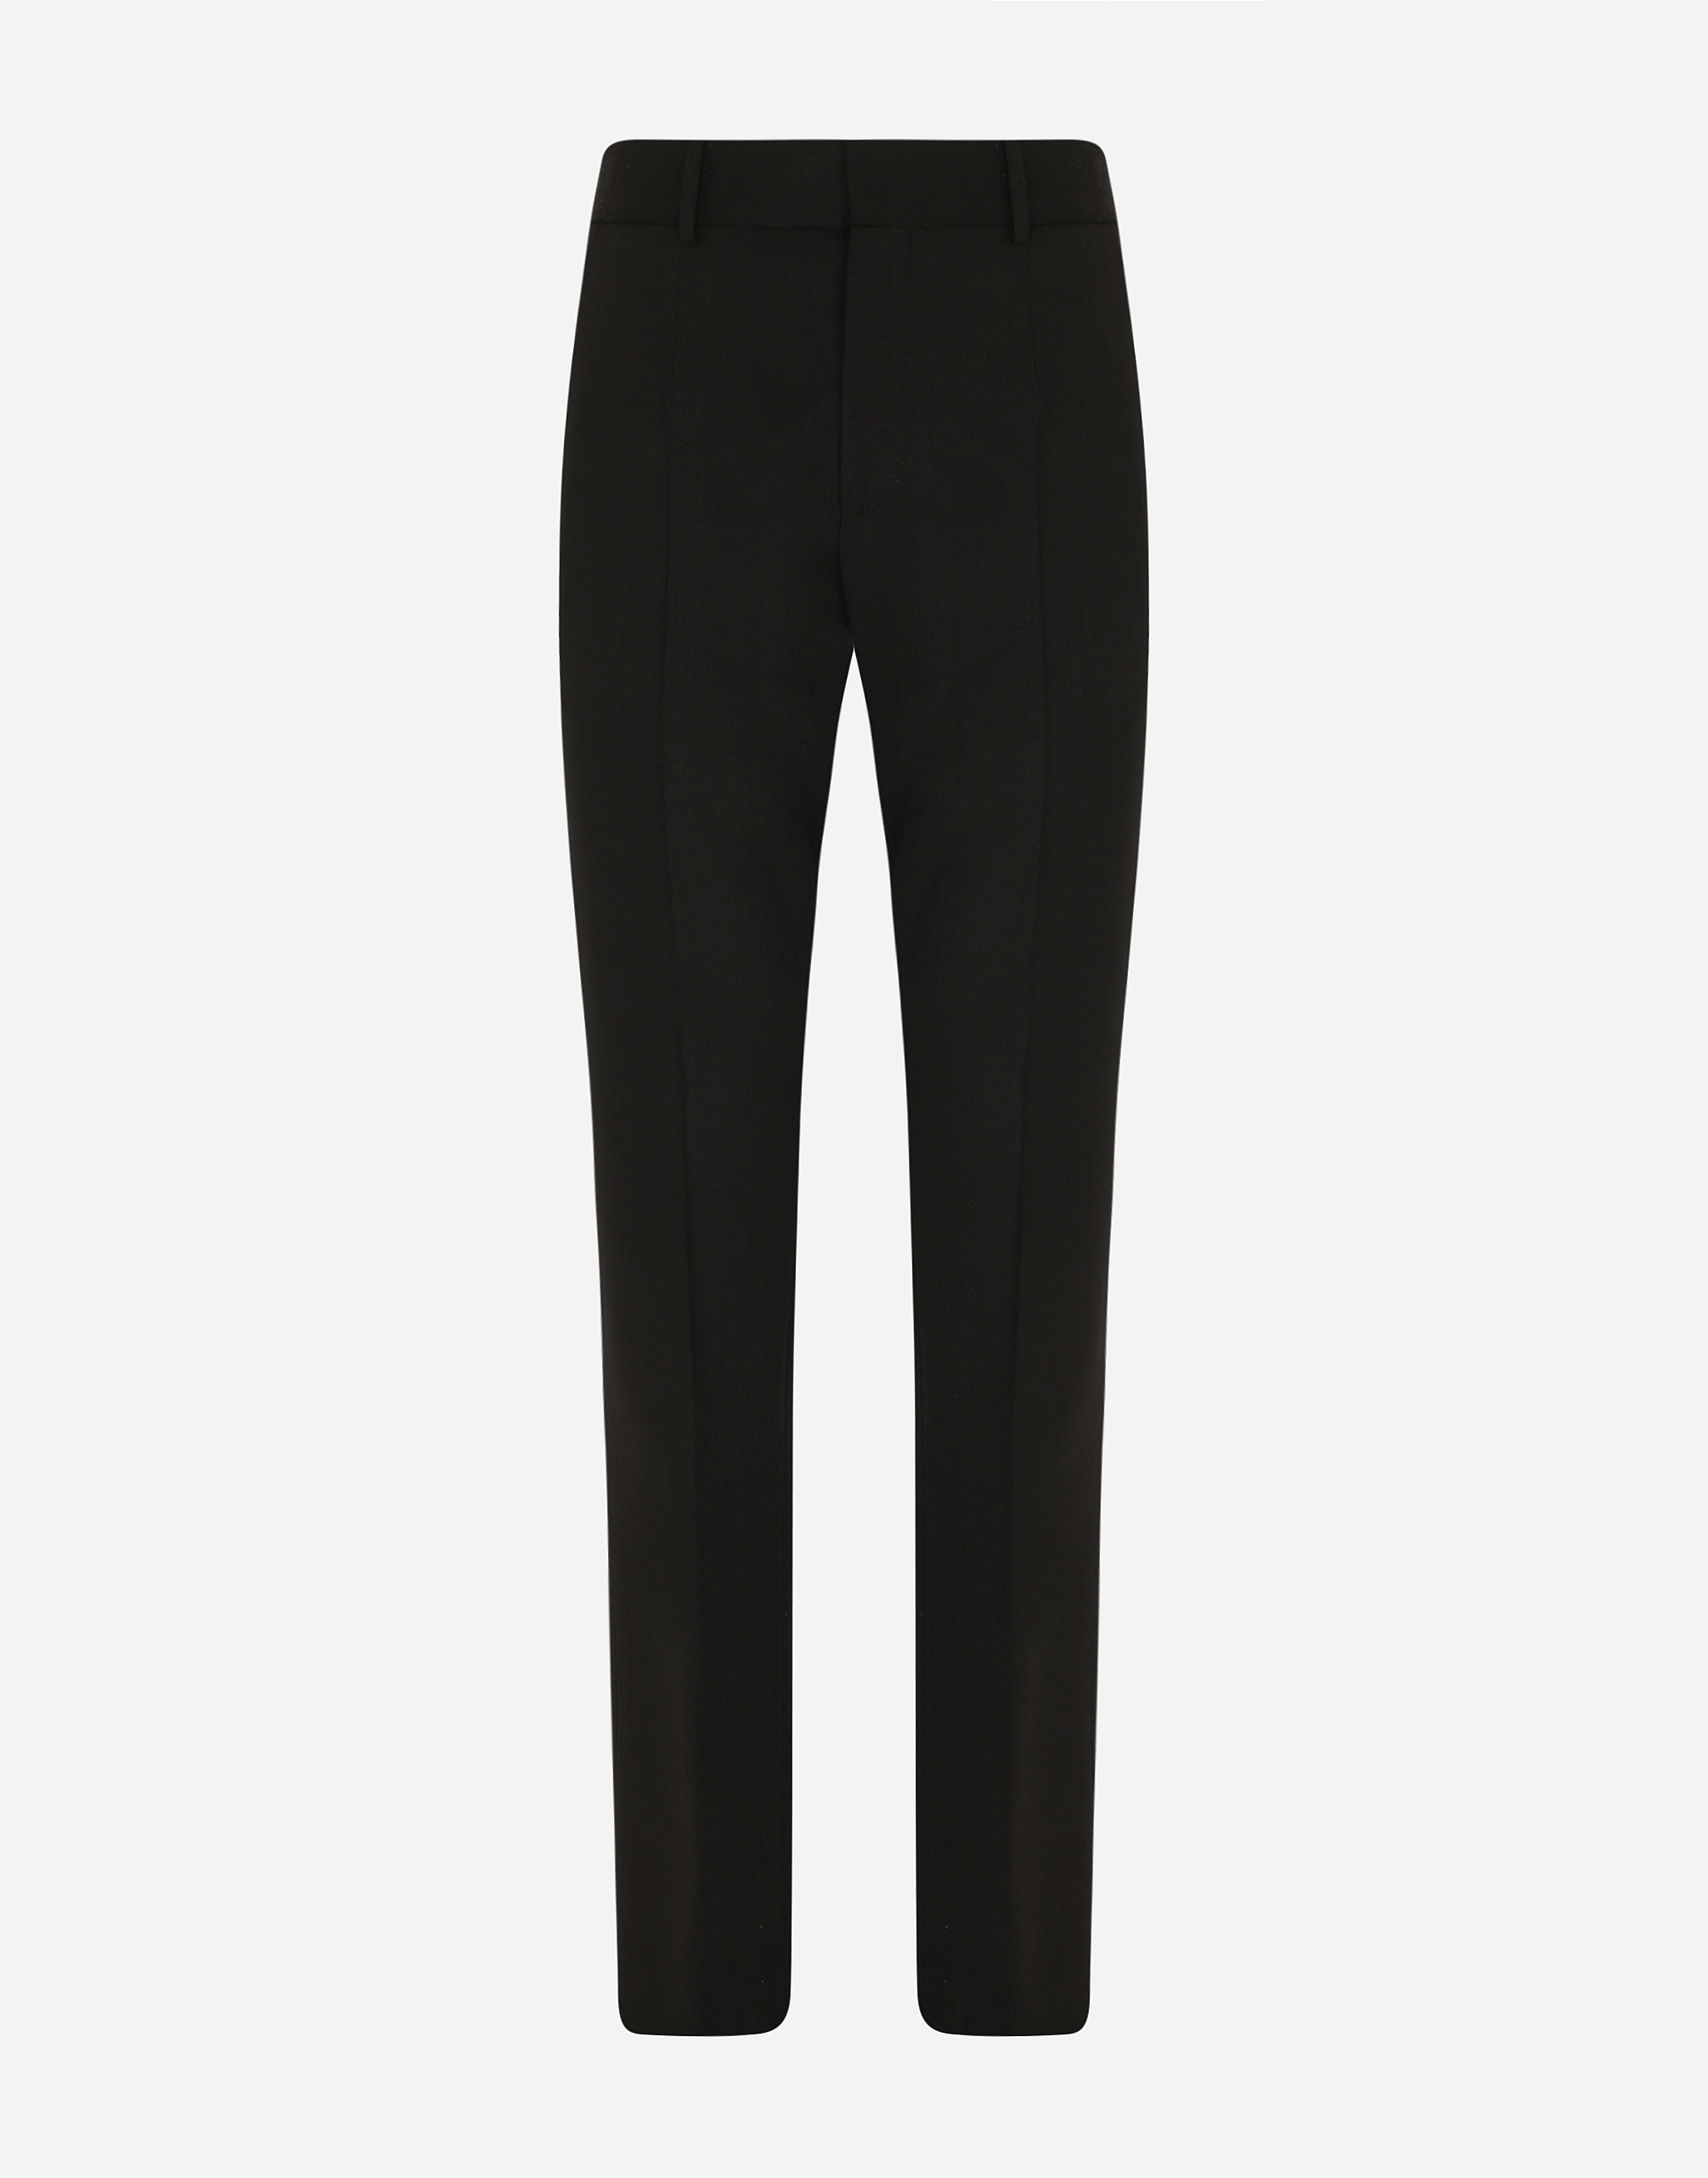 Stretch wool pants with side bands in Black